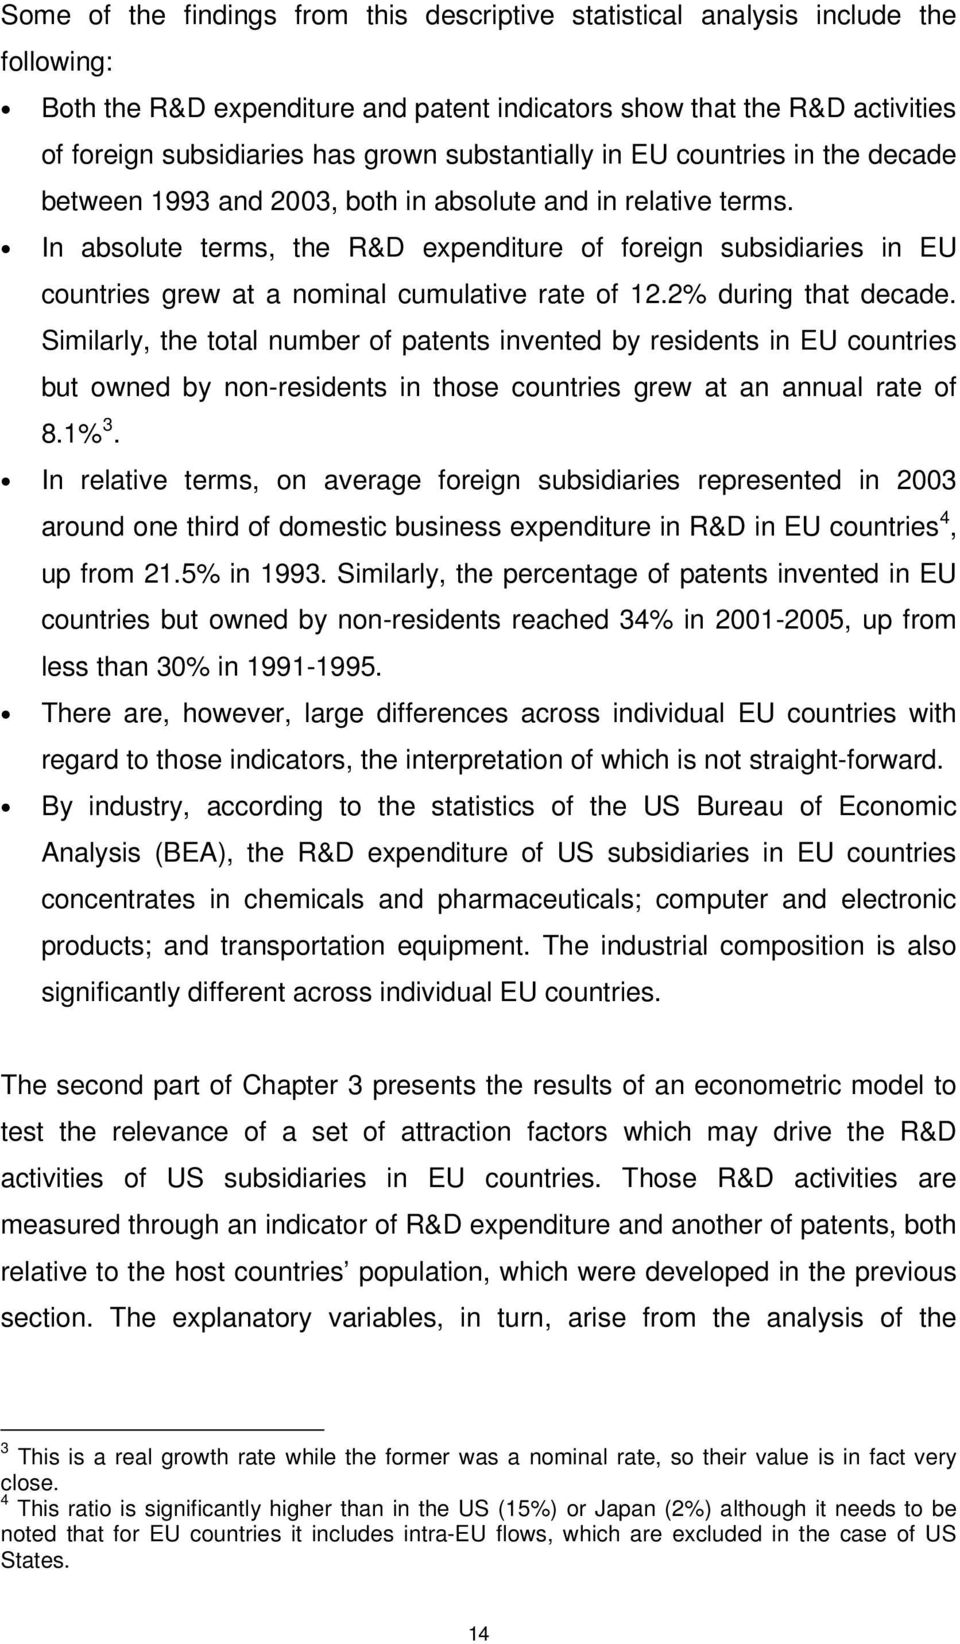 In absolute terms, the R&D expenditure of foreign subsidiaries in EU countries grew at a nominal cumulative rate of 12.2% during that decade.